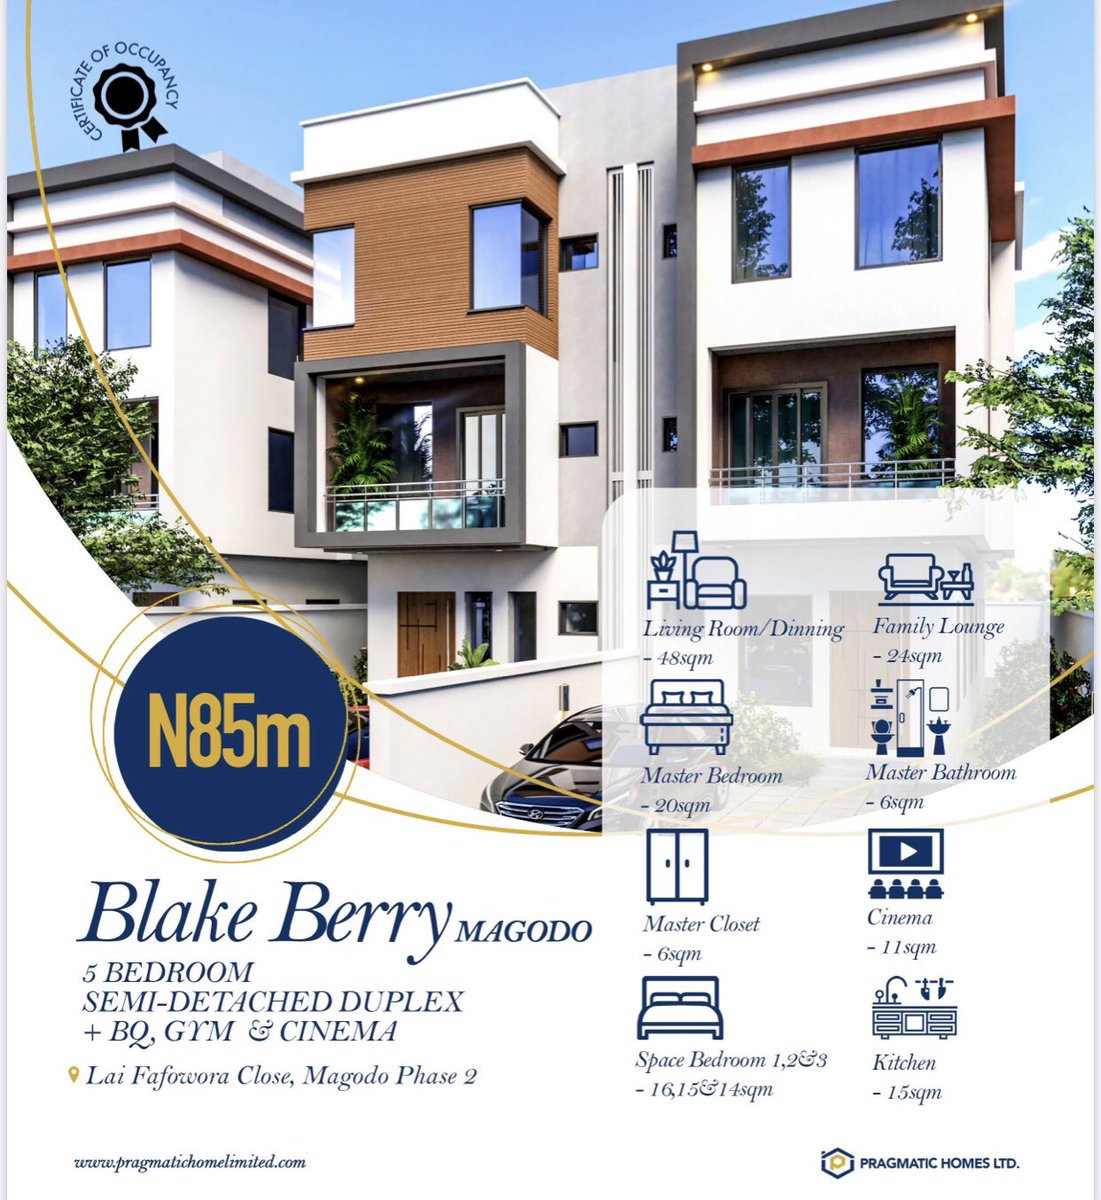 BLAKE BERRY A five bedroom semi-detached duplex with BQ + GYM and also a Cinema.